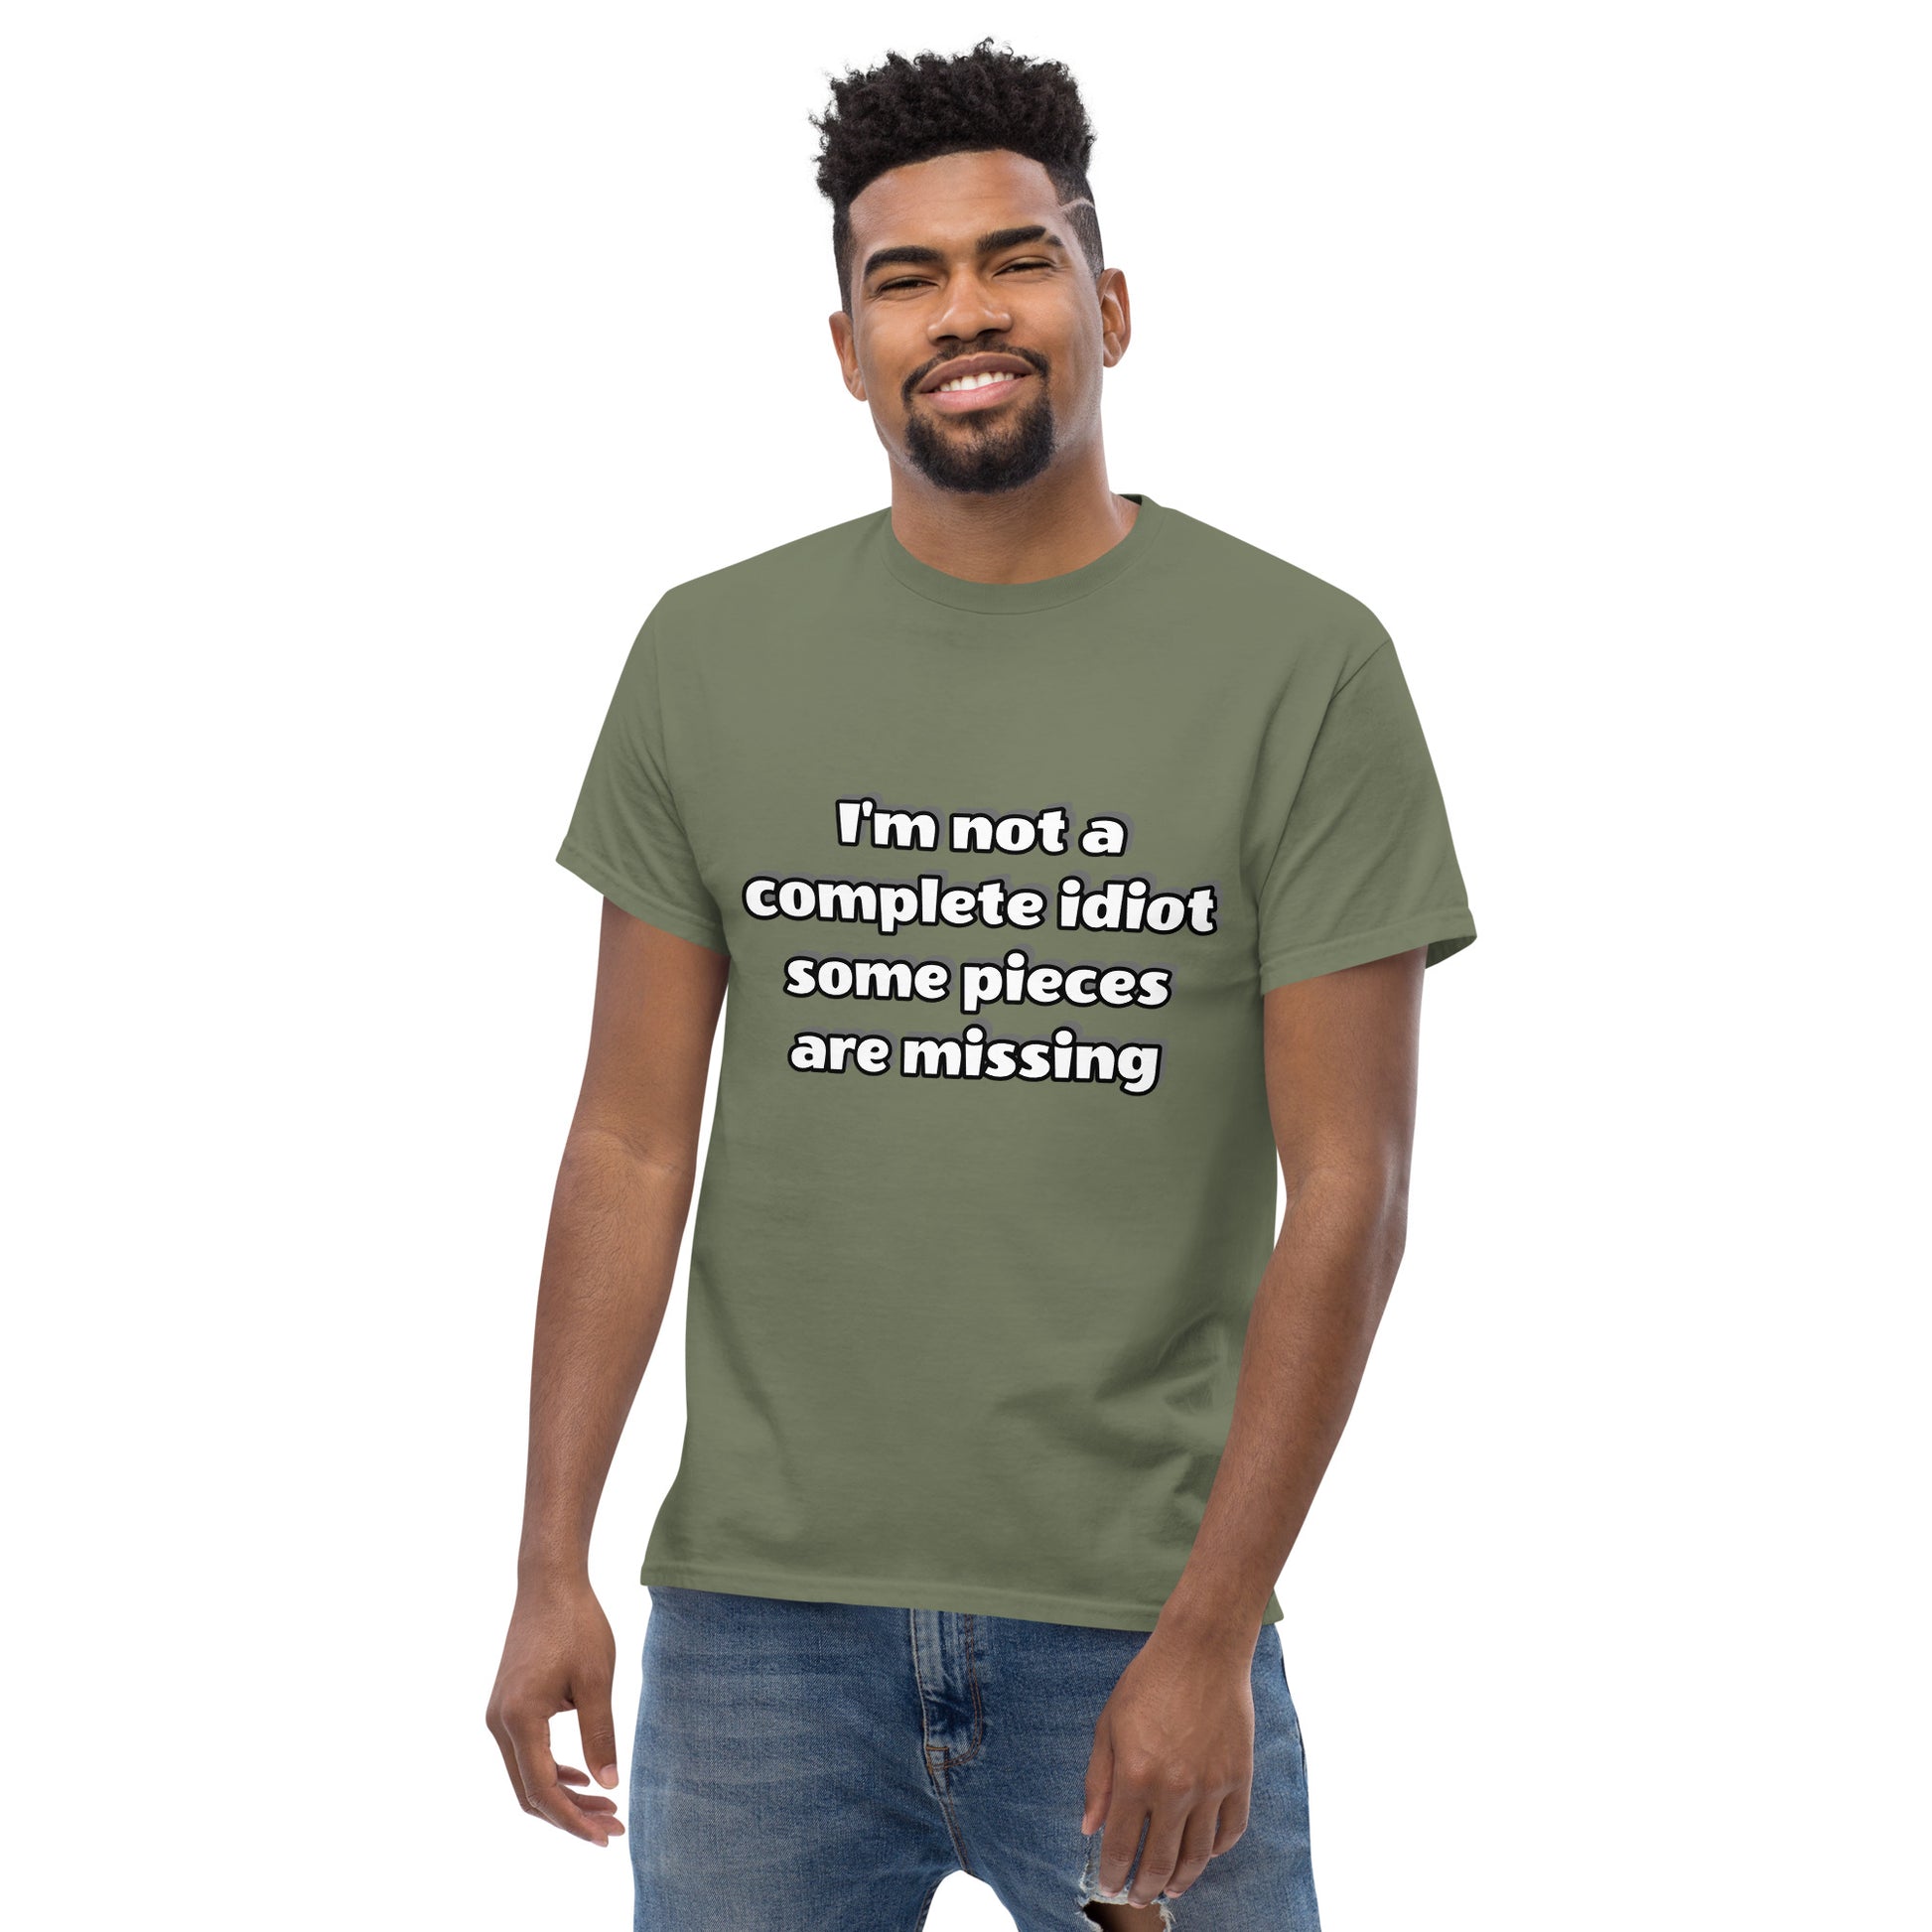 Men with military green t-shirt with text “I’m not a complete idiot, some pieces are missing”